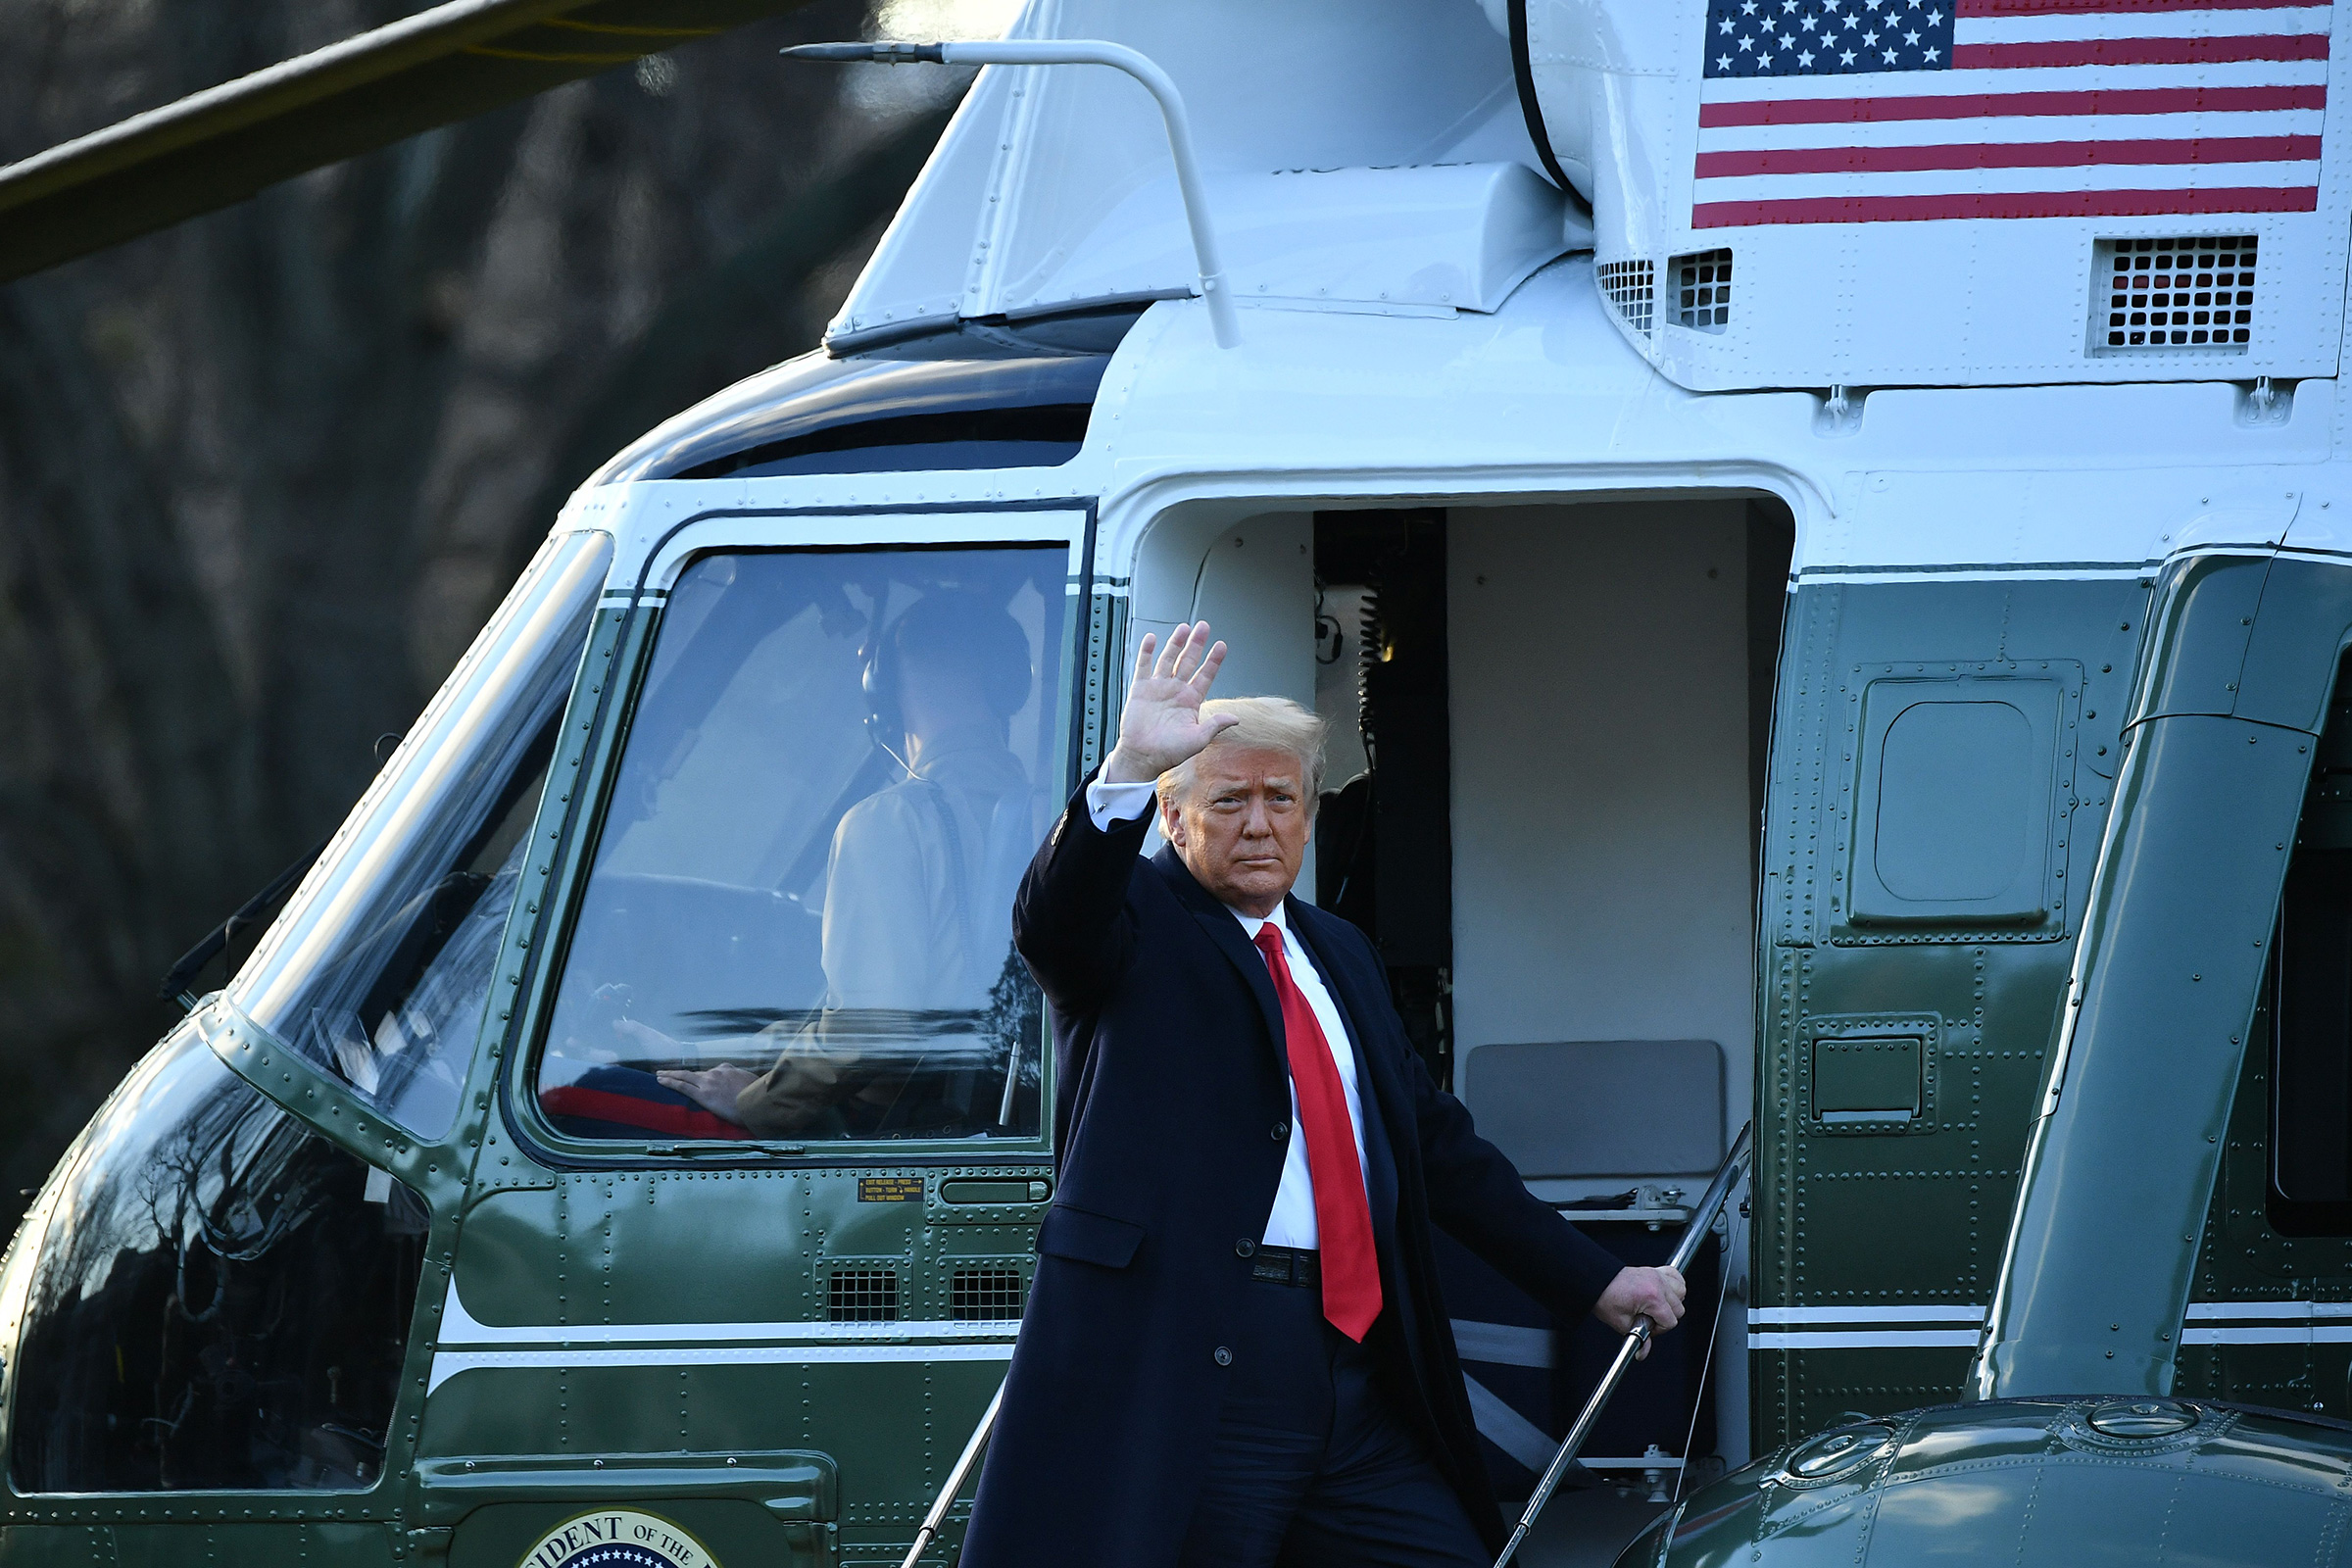 Outgoing President Donald Trump waves as he boards Marine One at the White House in Washington, D.C., on Jan. 20. (Mandel Ngan—AFP/Getty Images)